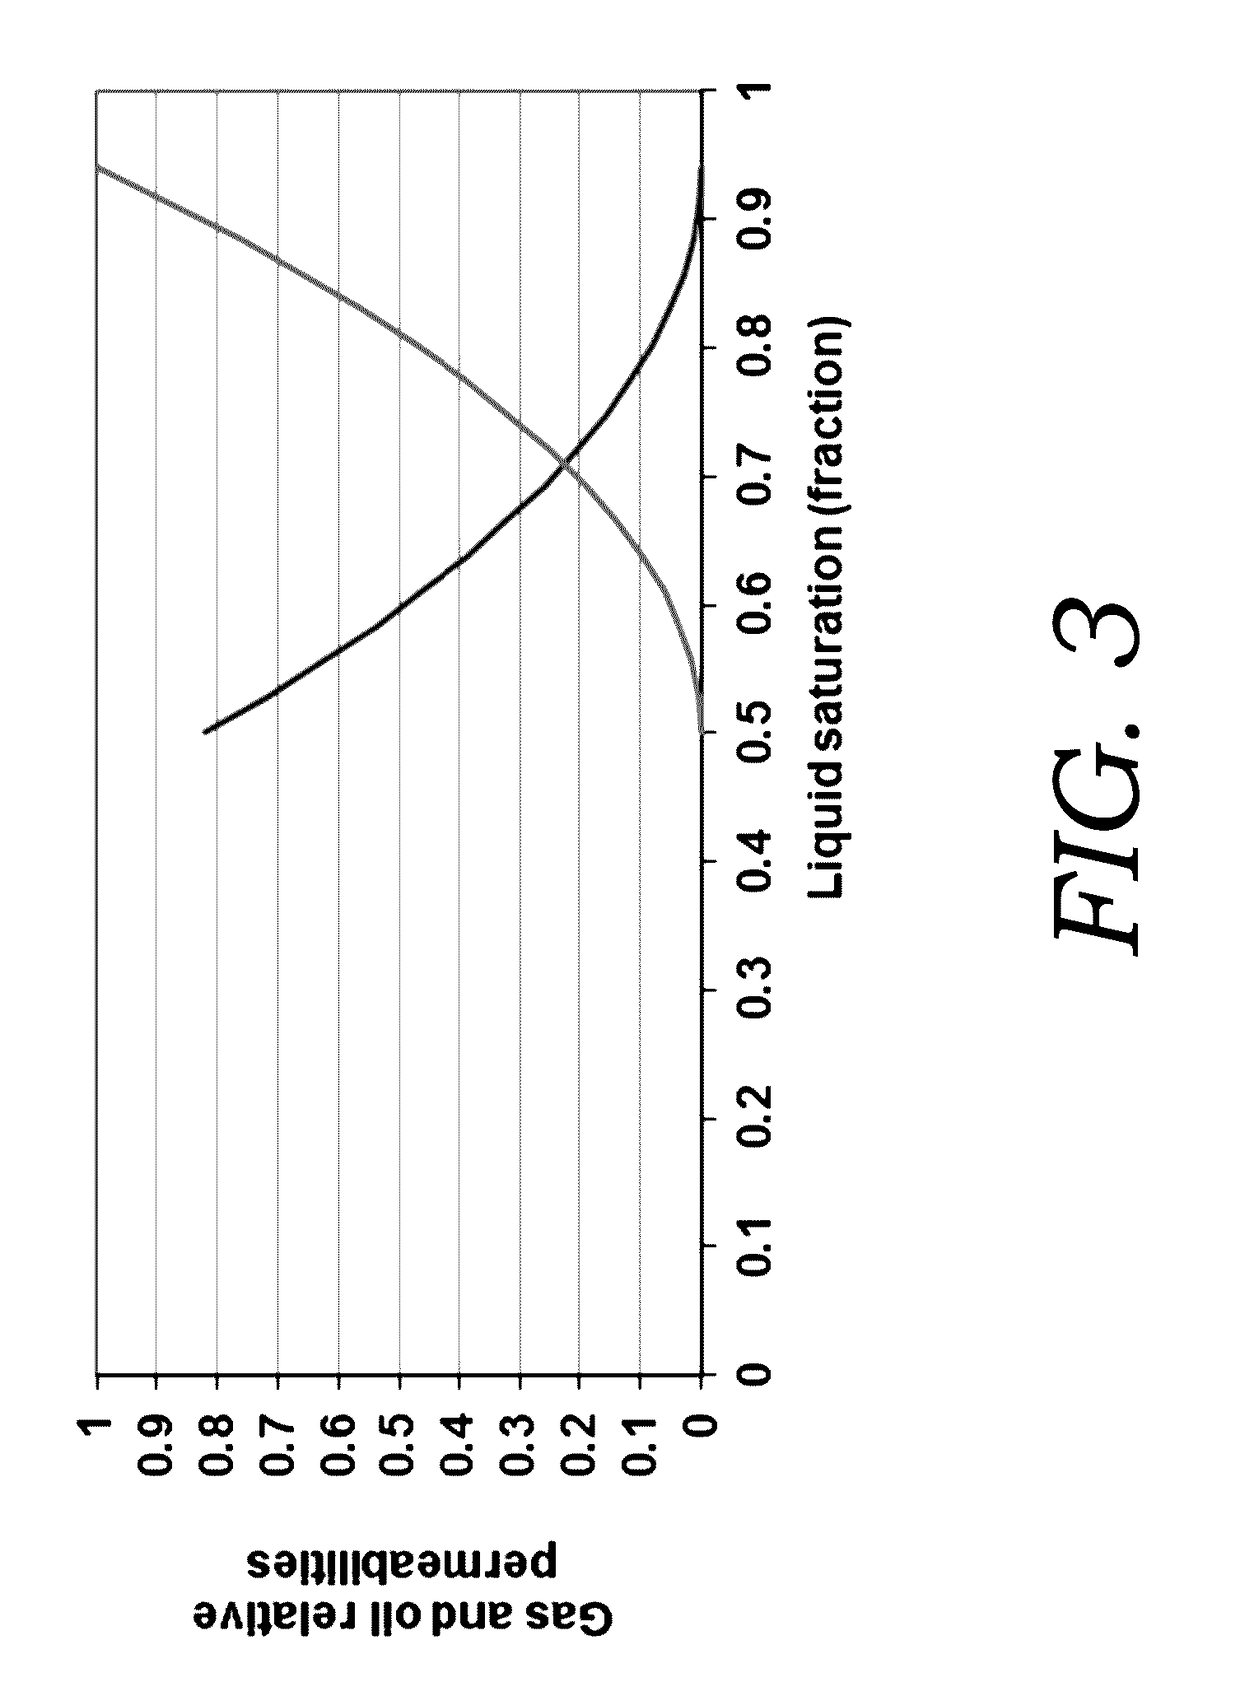 Method for optimization of huff-n-puff gas injection in shale reservoirs